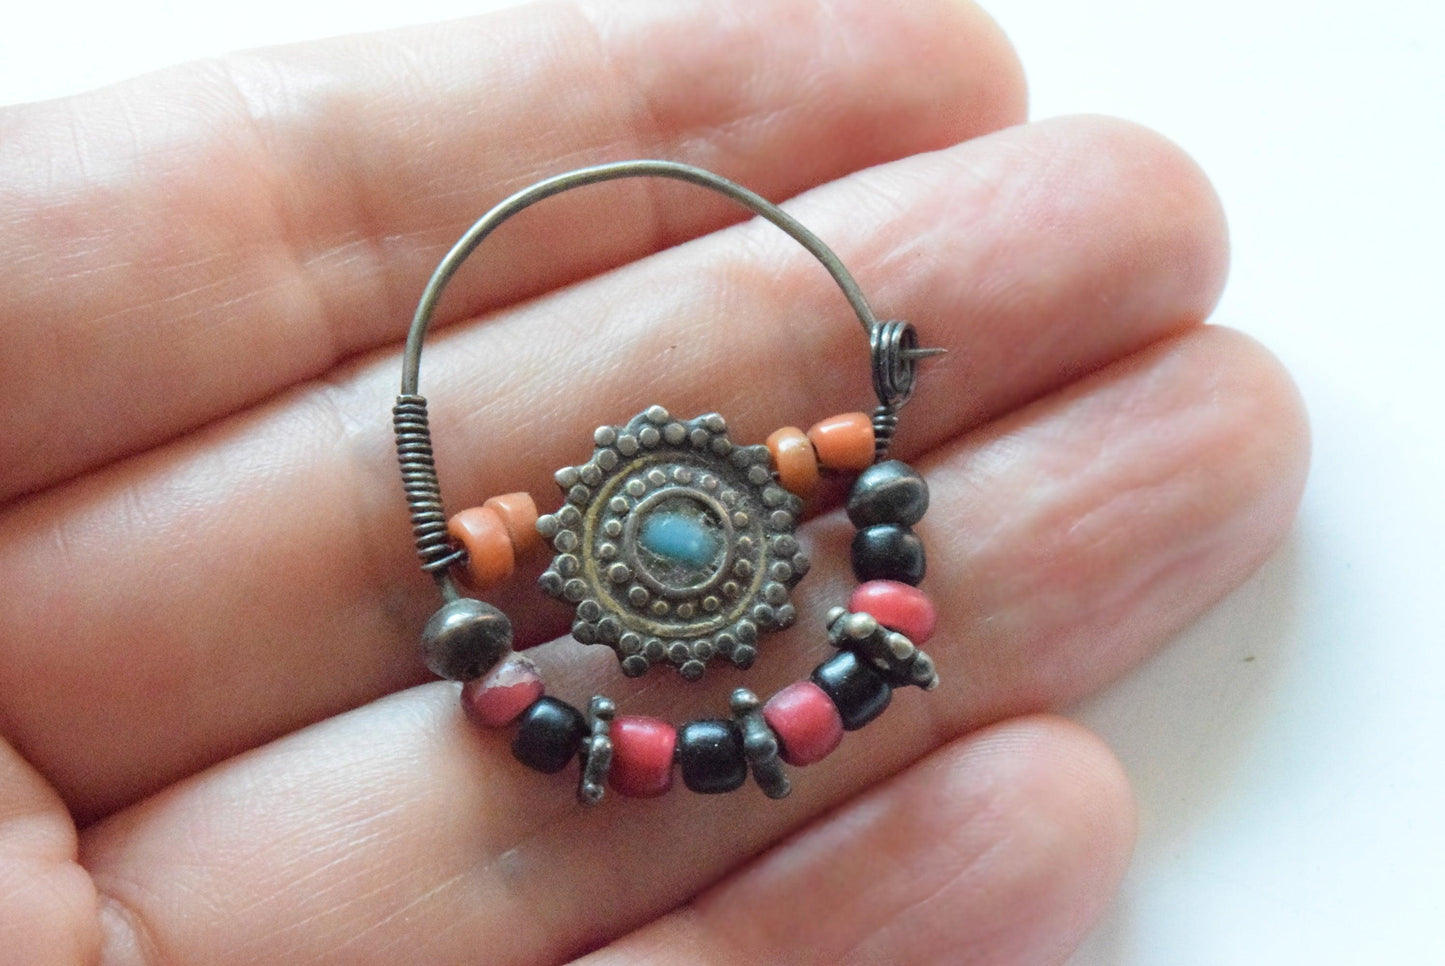 Antique Silver and Coral Uzbek Nose Ring with Black and Red Beads - Anteeka